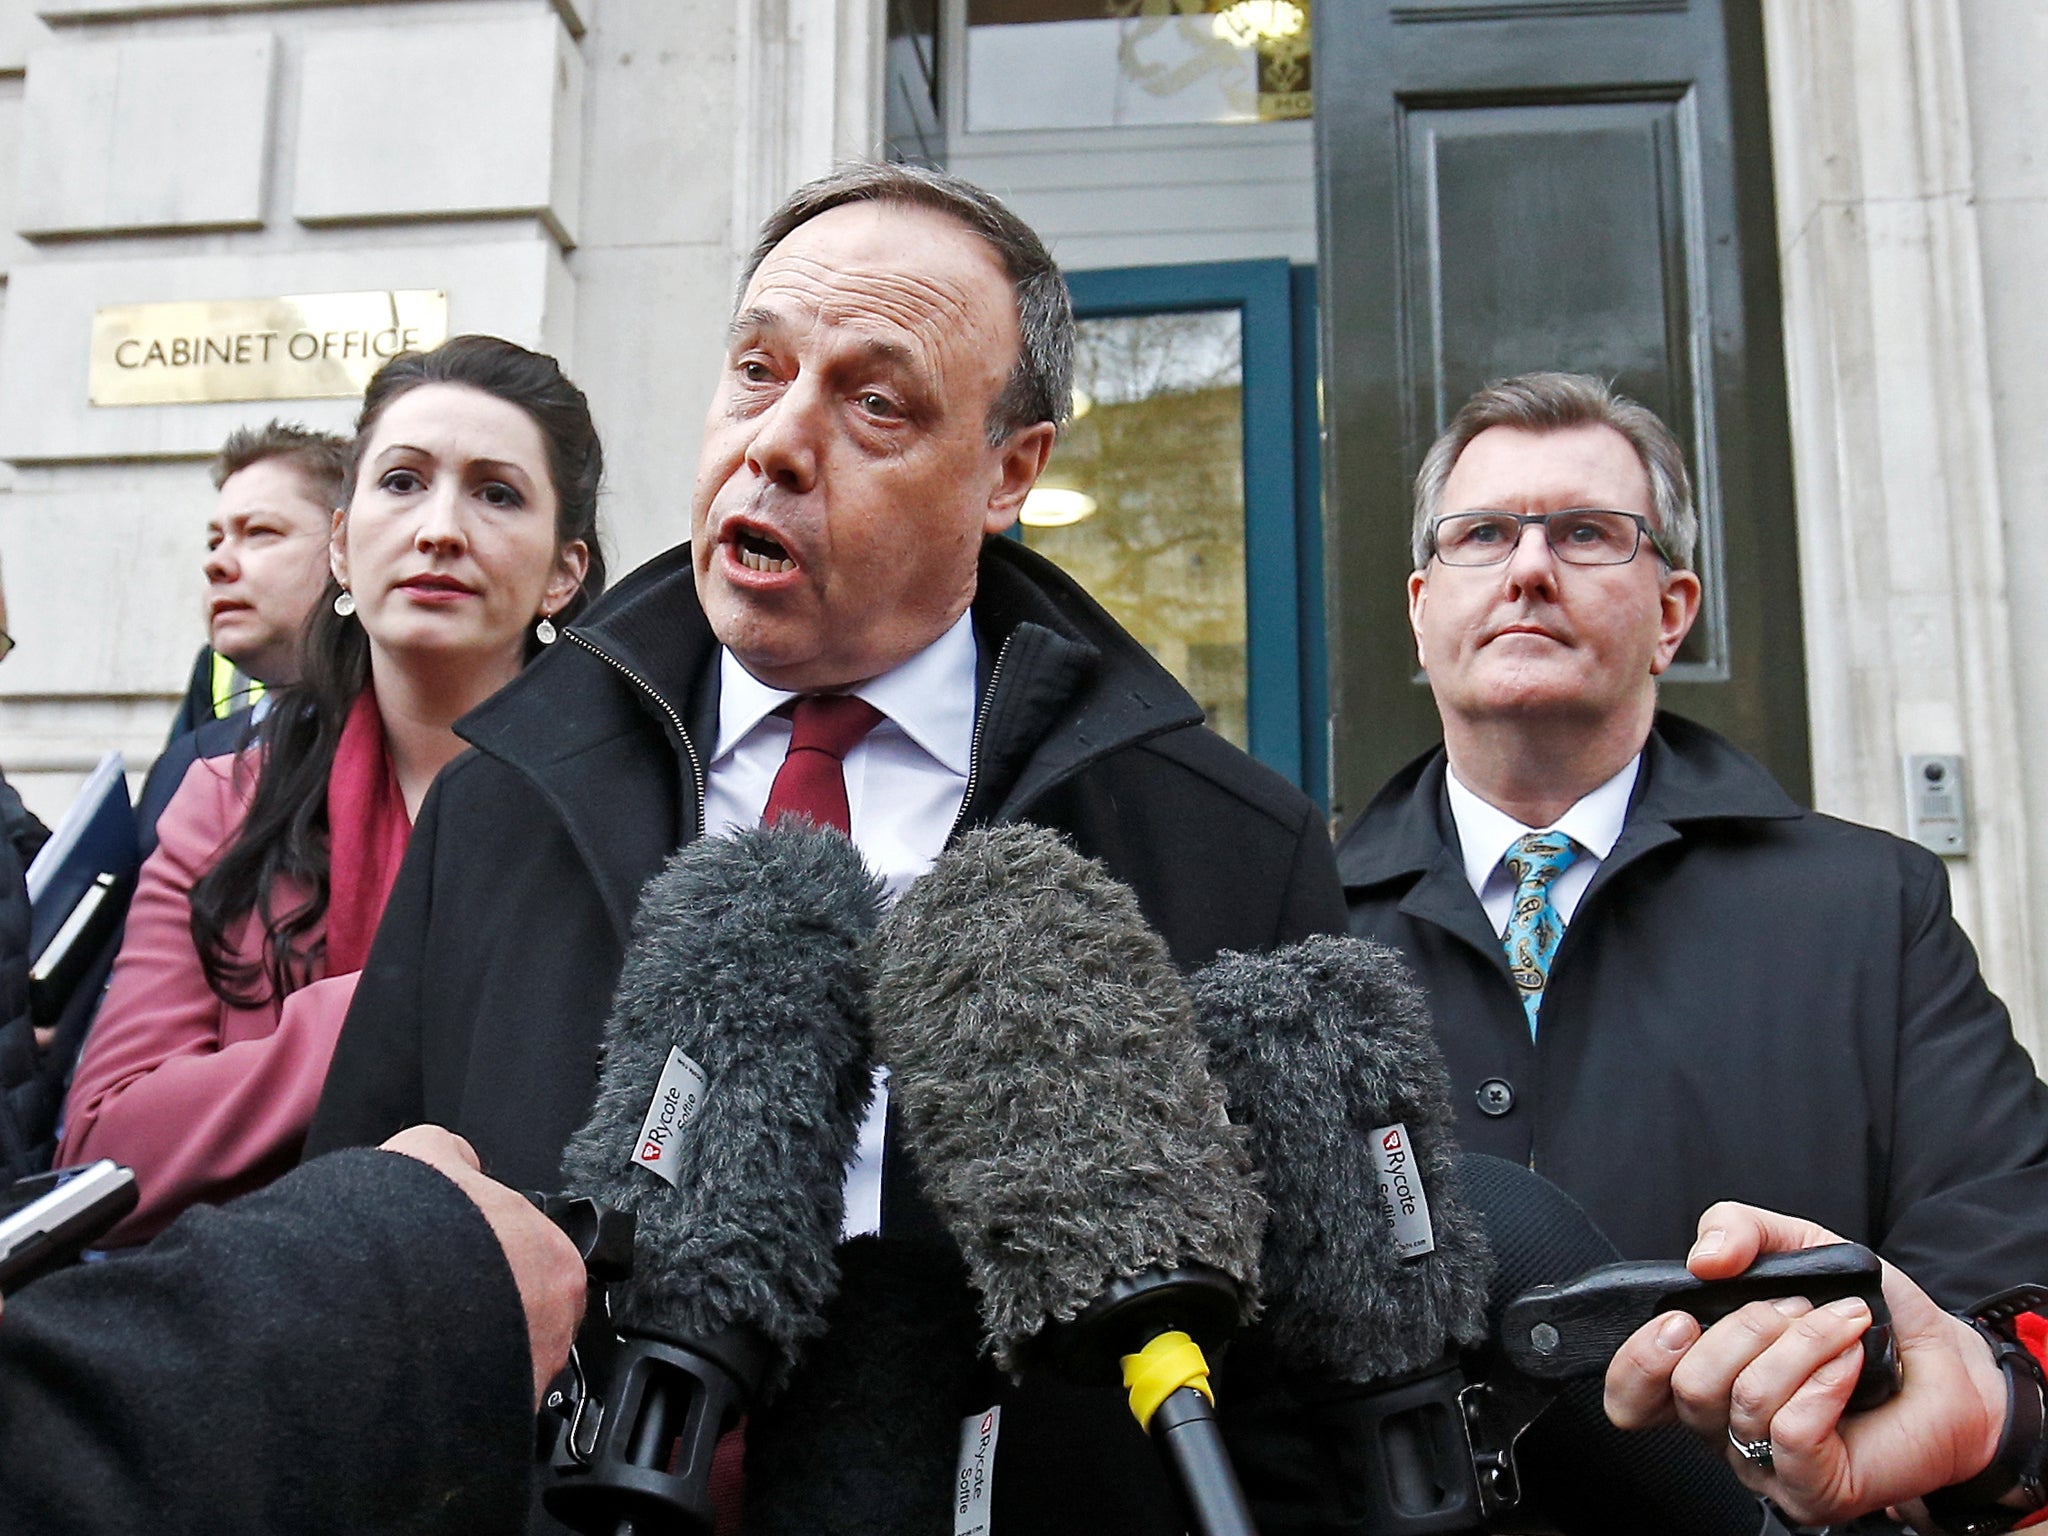 ‘We are not discussing cash,’ insists DUP Westminster leader Nigel Dodds